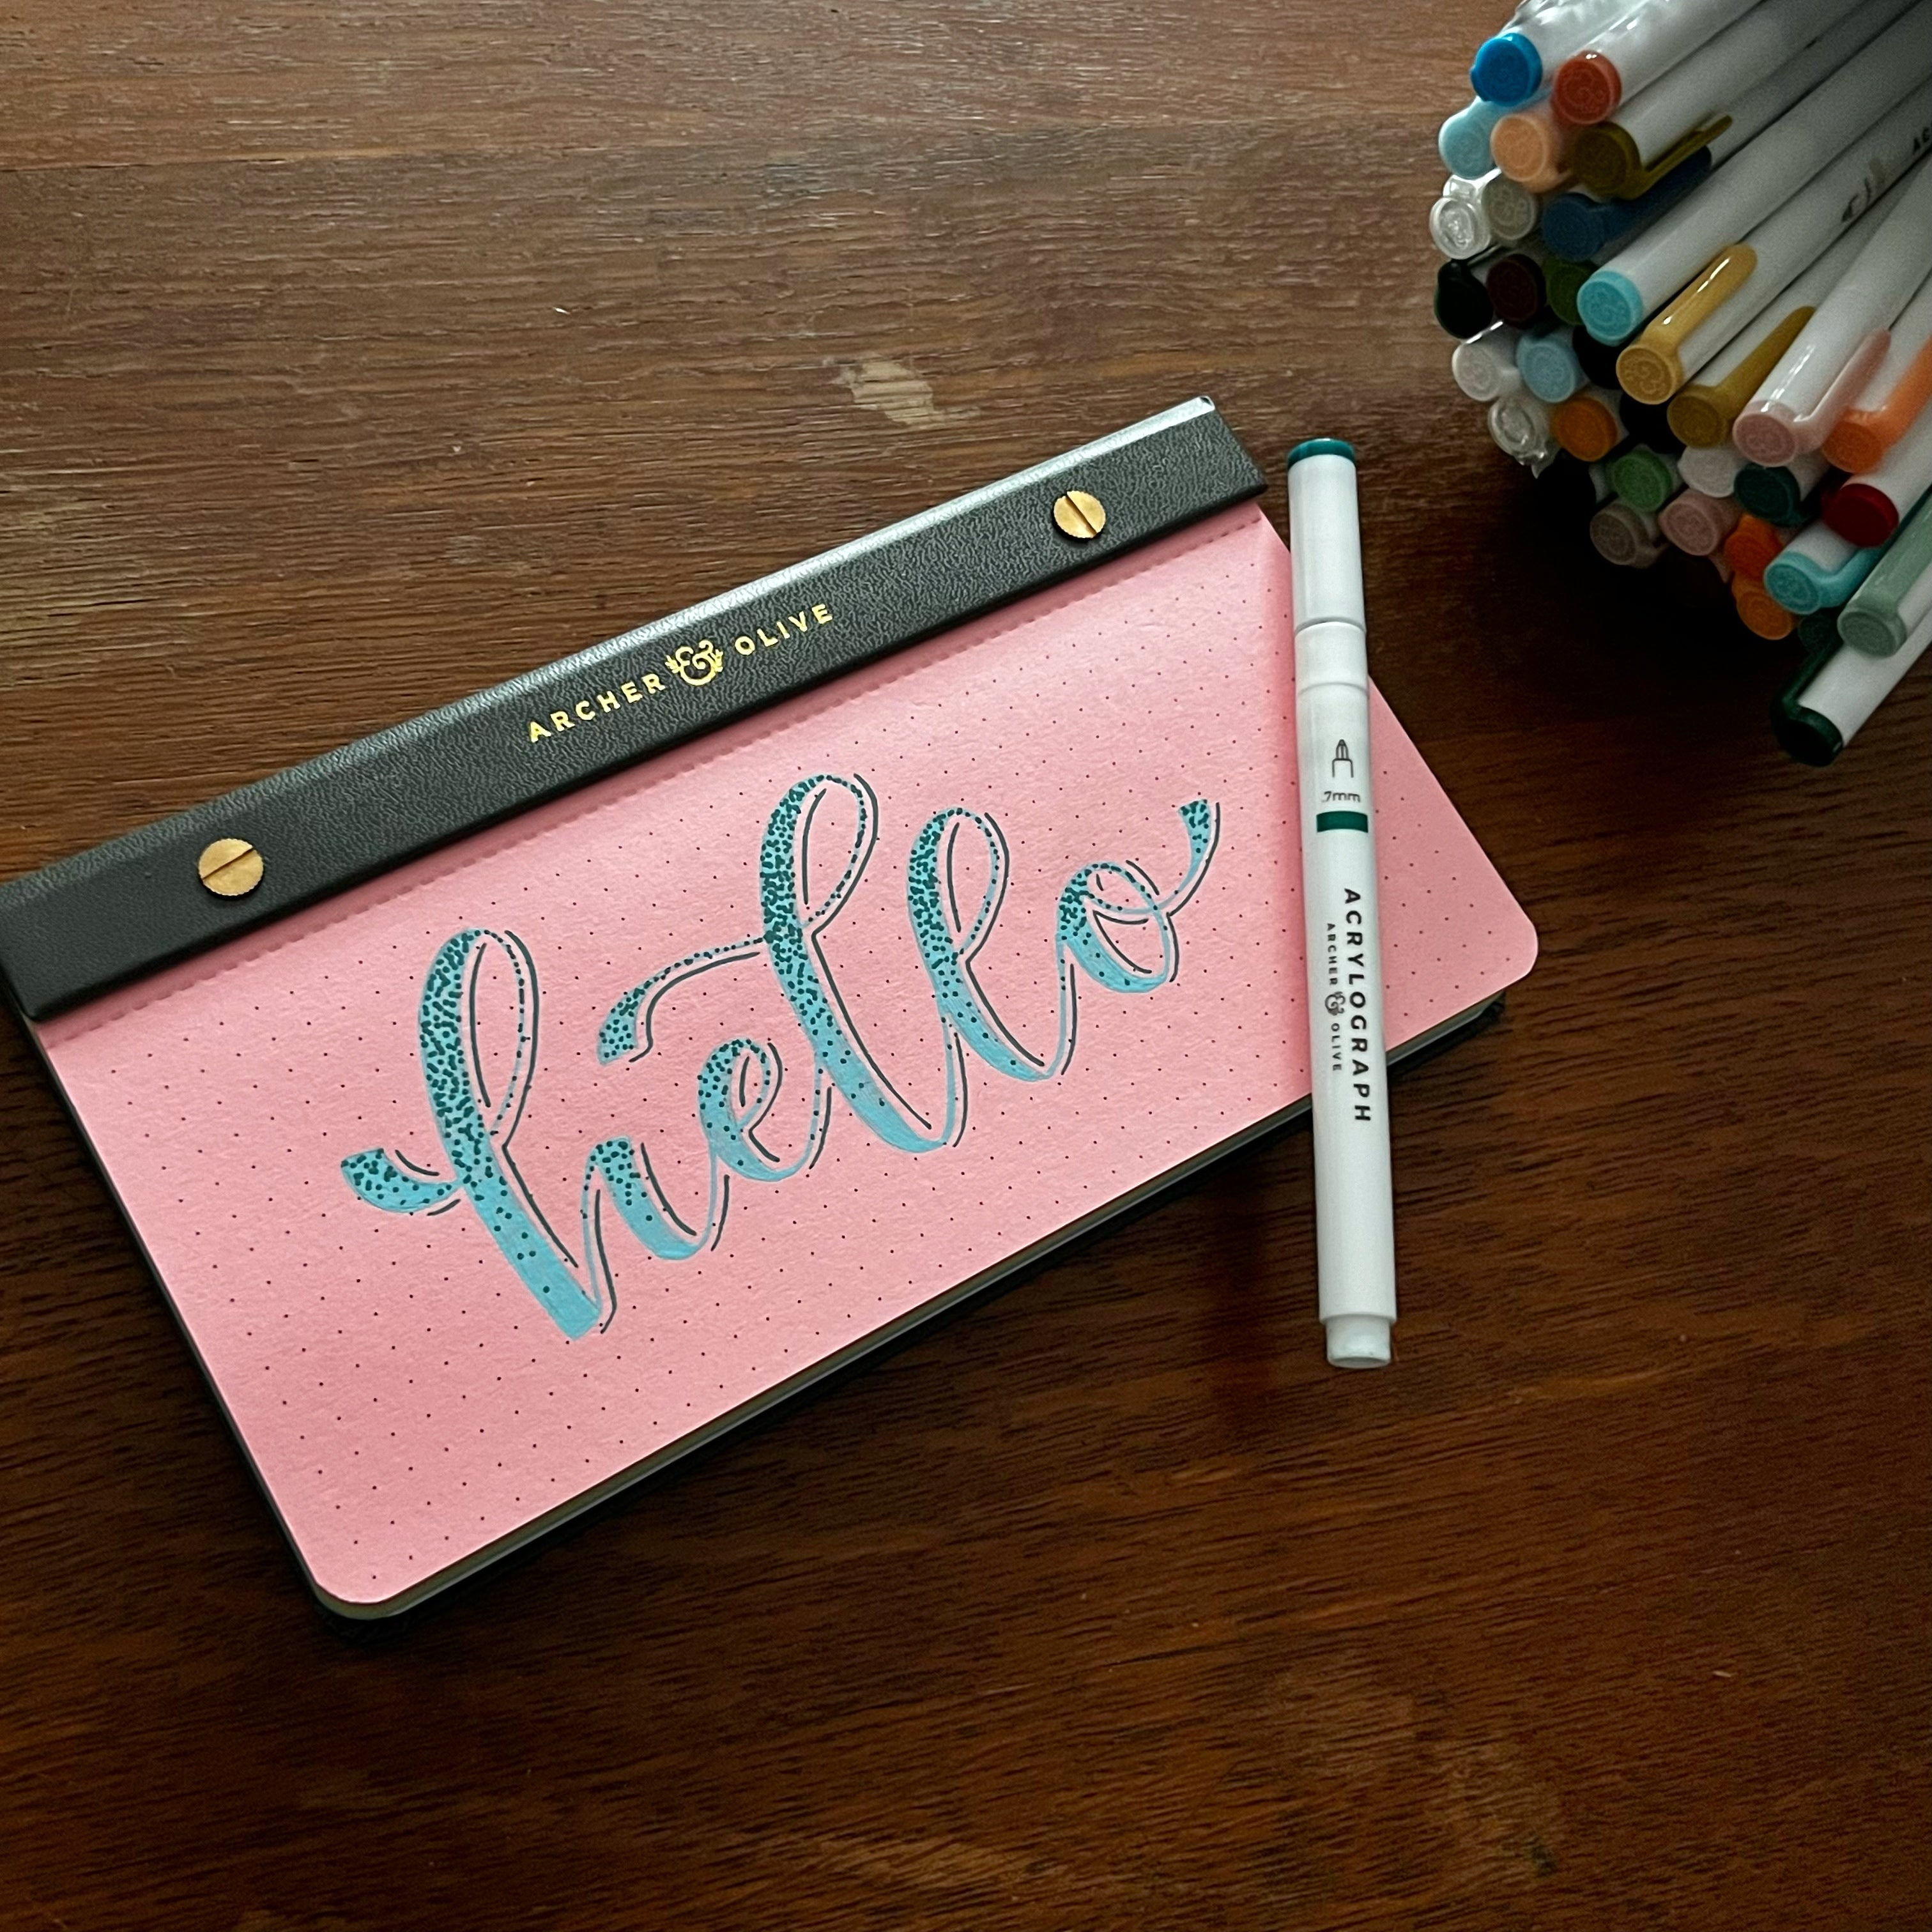 Pink paper notepad with container of Acrylograph pens. Faux calligraphy “hello” lettered on the paper.